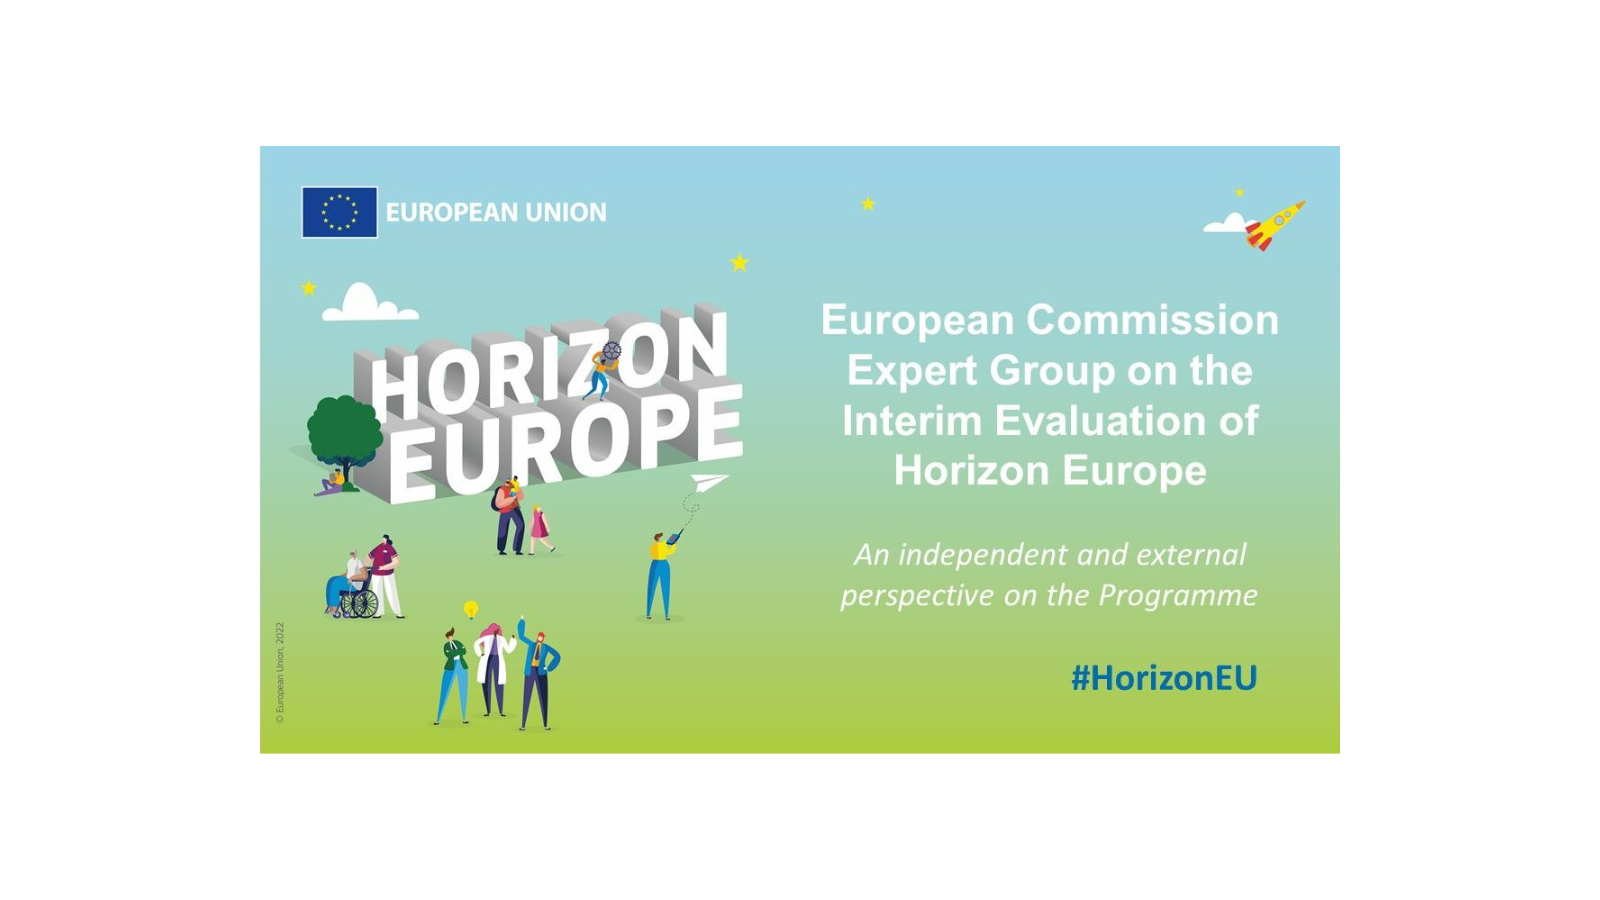 Call to join the Commission Expert Group on the Interim Evaluation of Horizon Europe